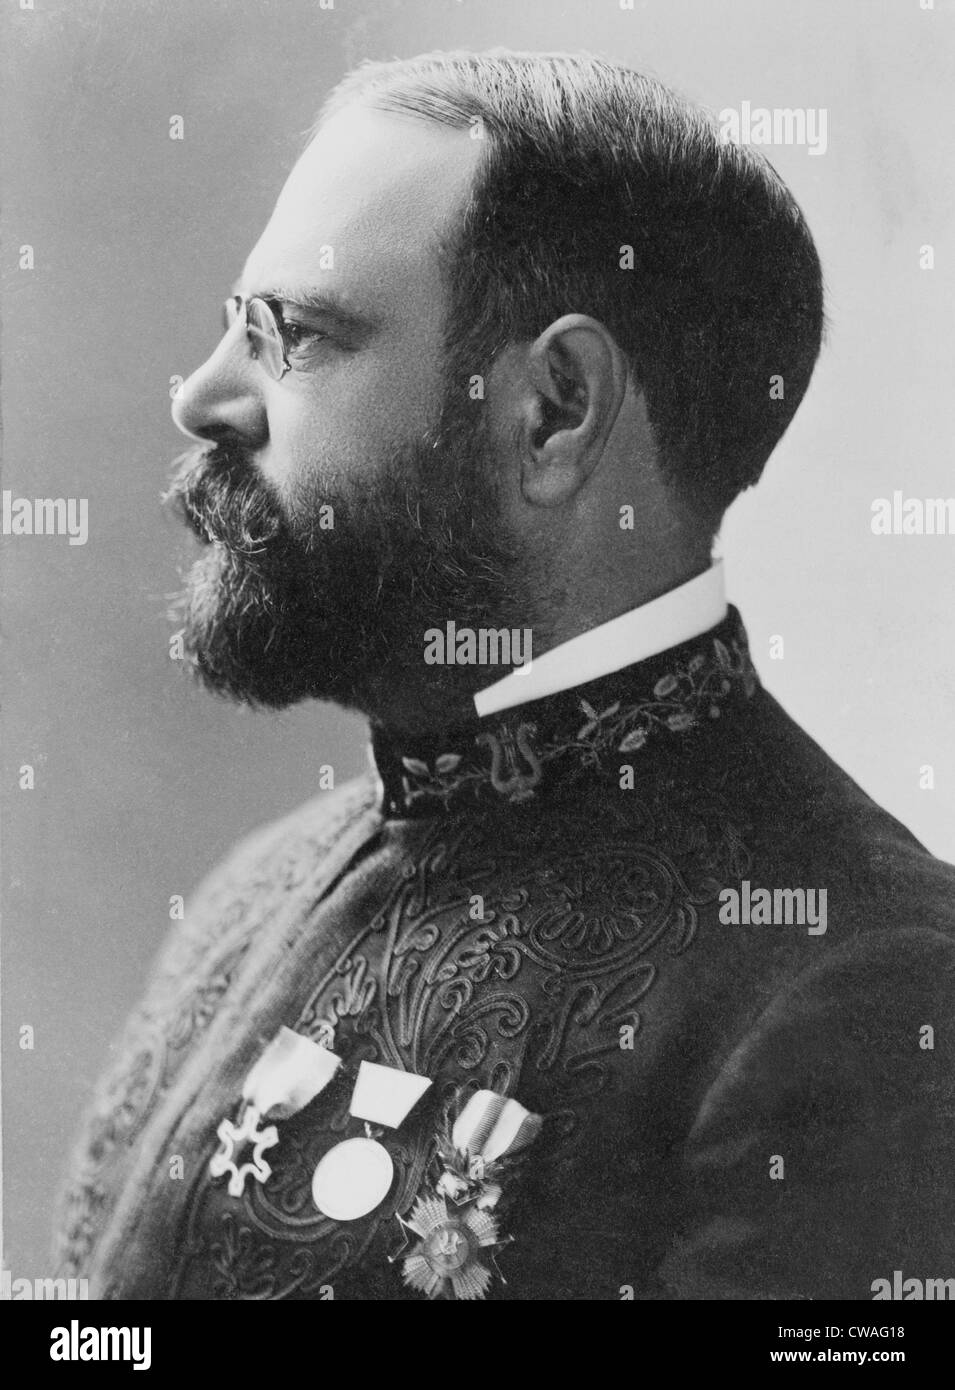 John Philip Sousa (1854-1932), wearing band uniform with medals.  After retiring from the Marines, Sousa formed his own band Stock Photo